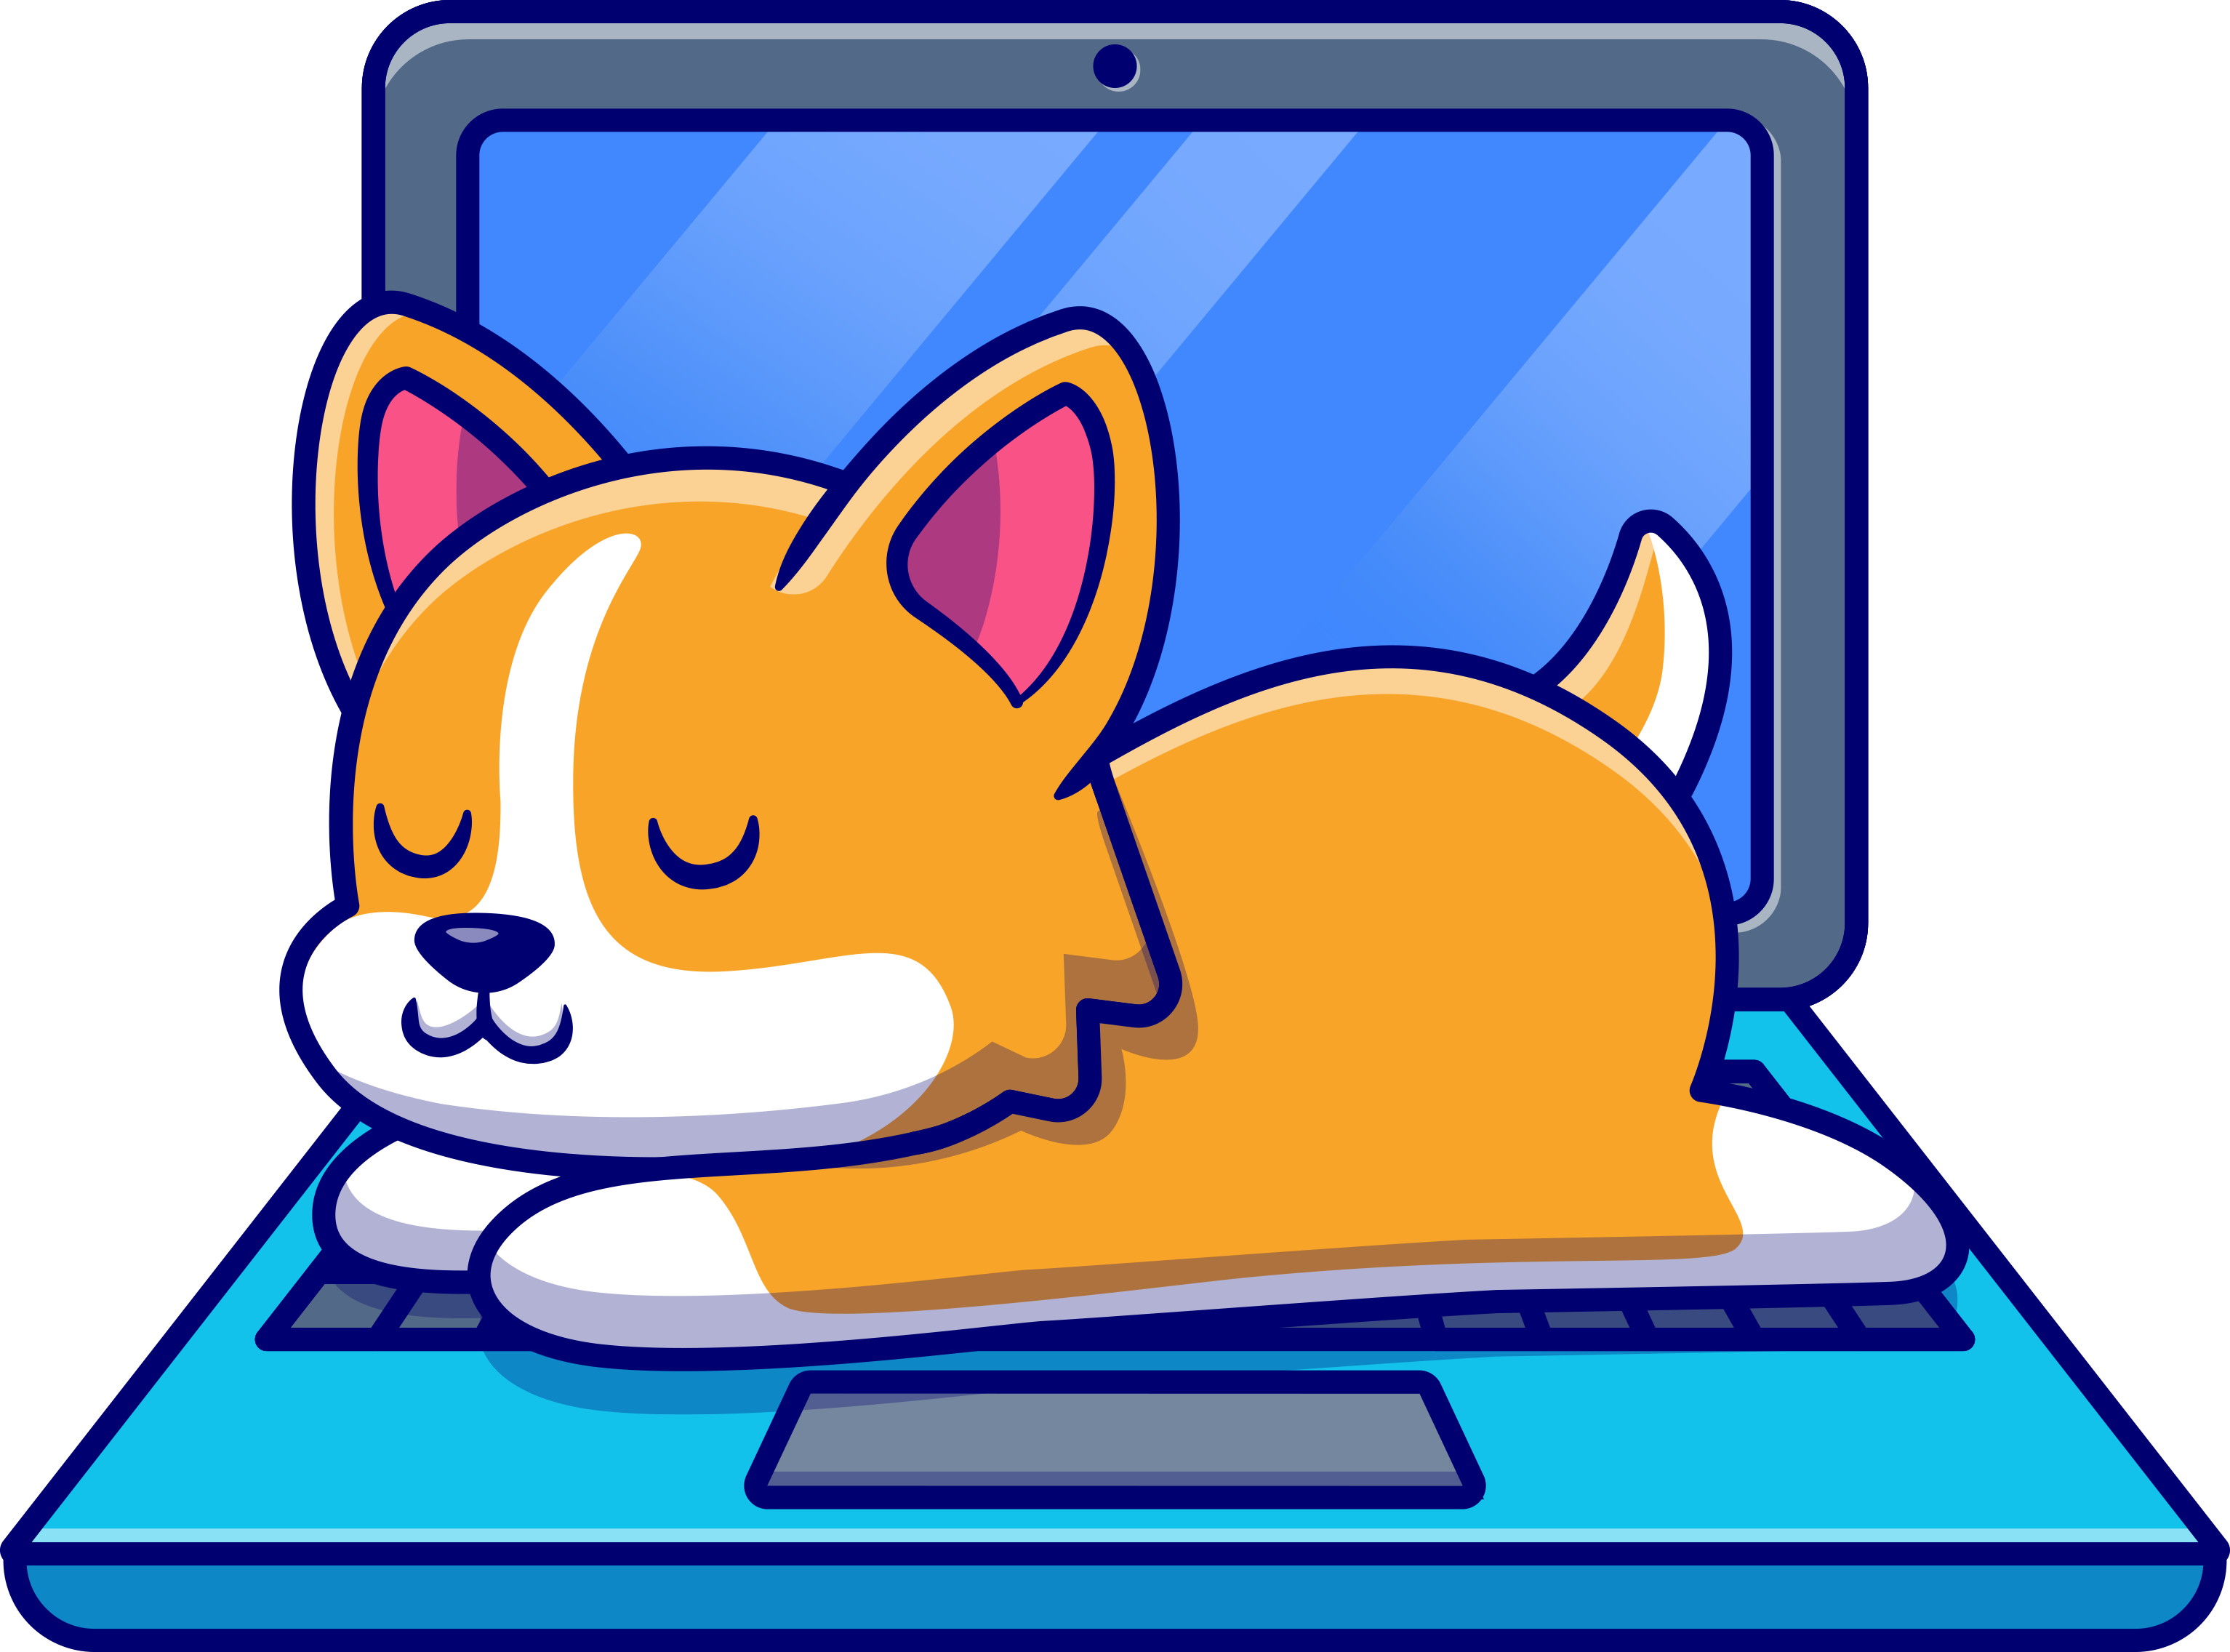 An illustration of a cute corgi snoozing on the keyboard of an open laptop.